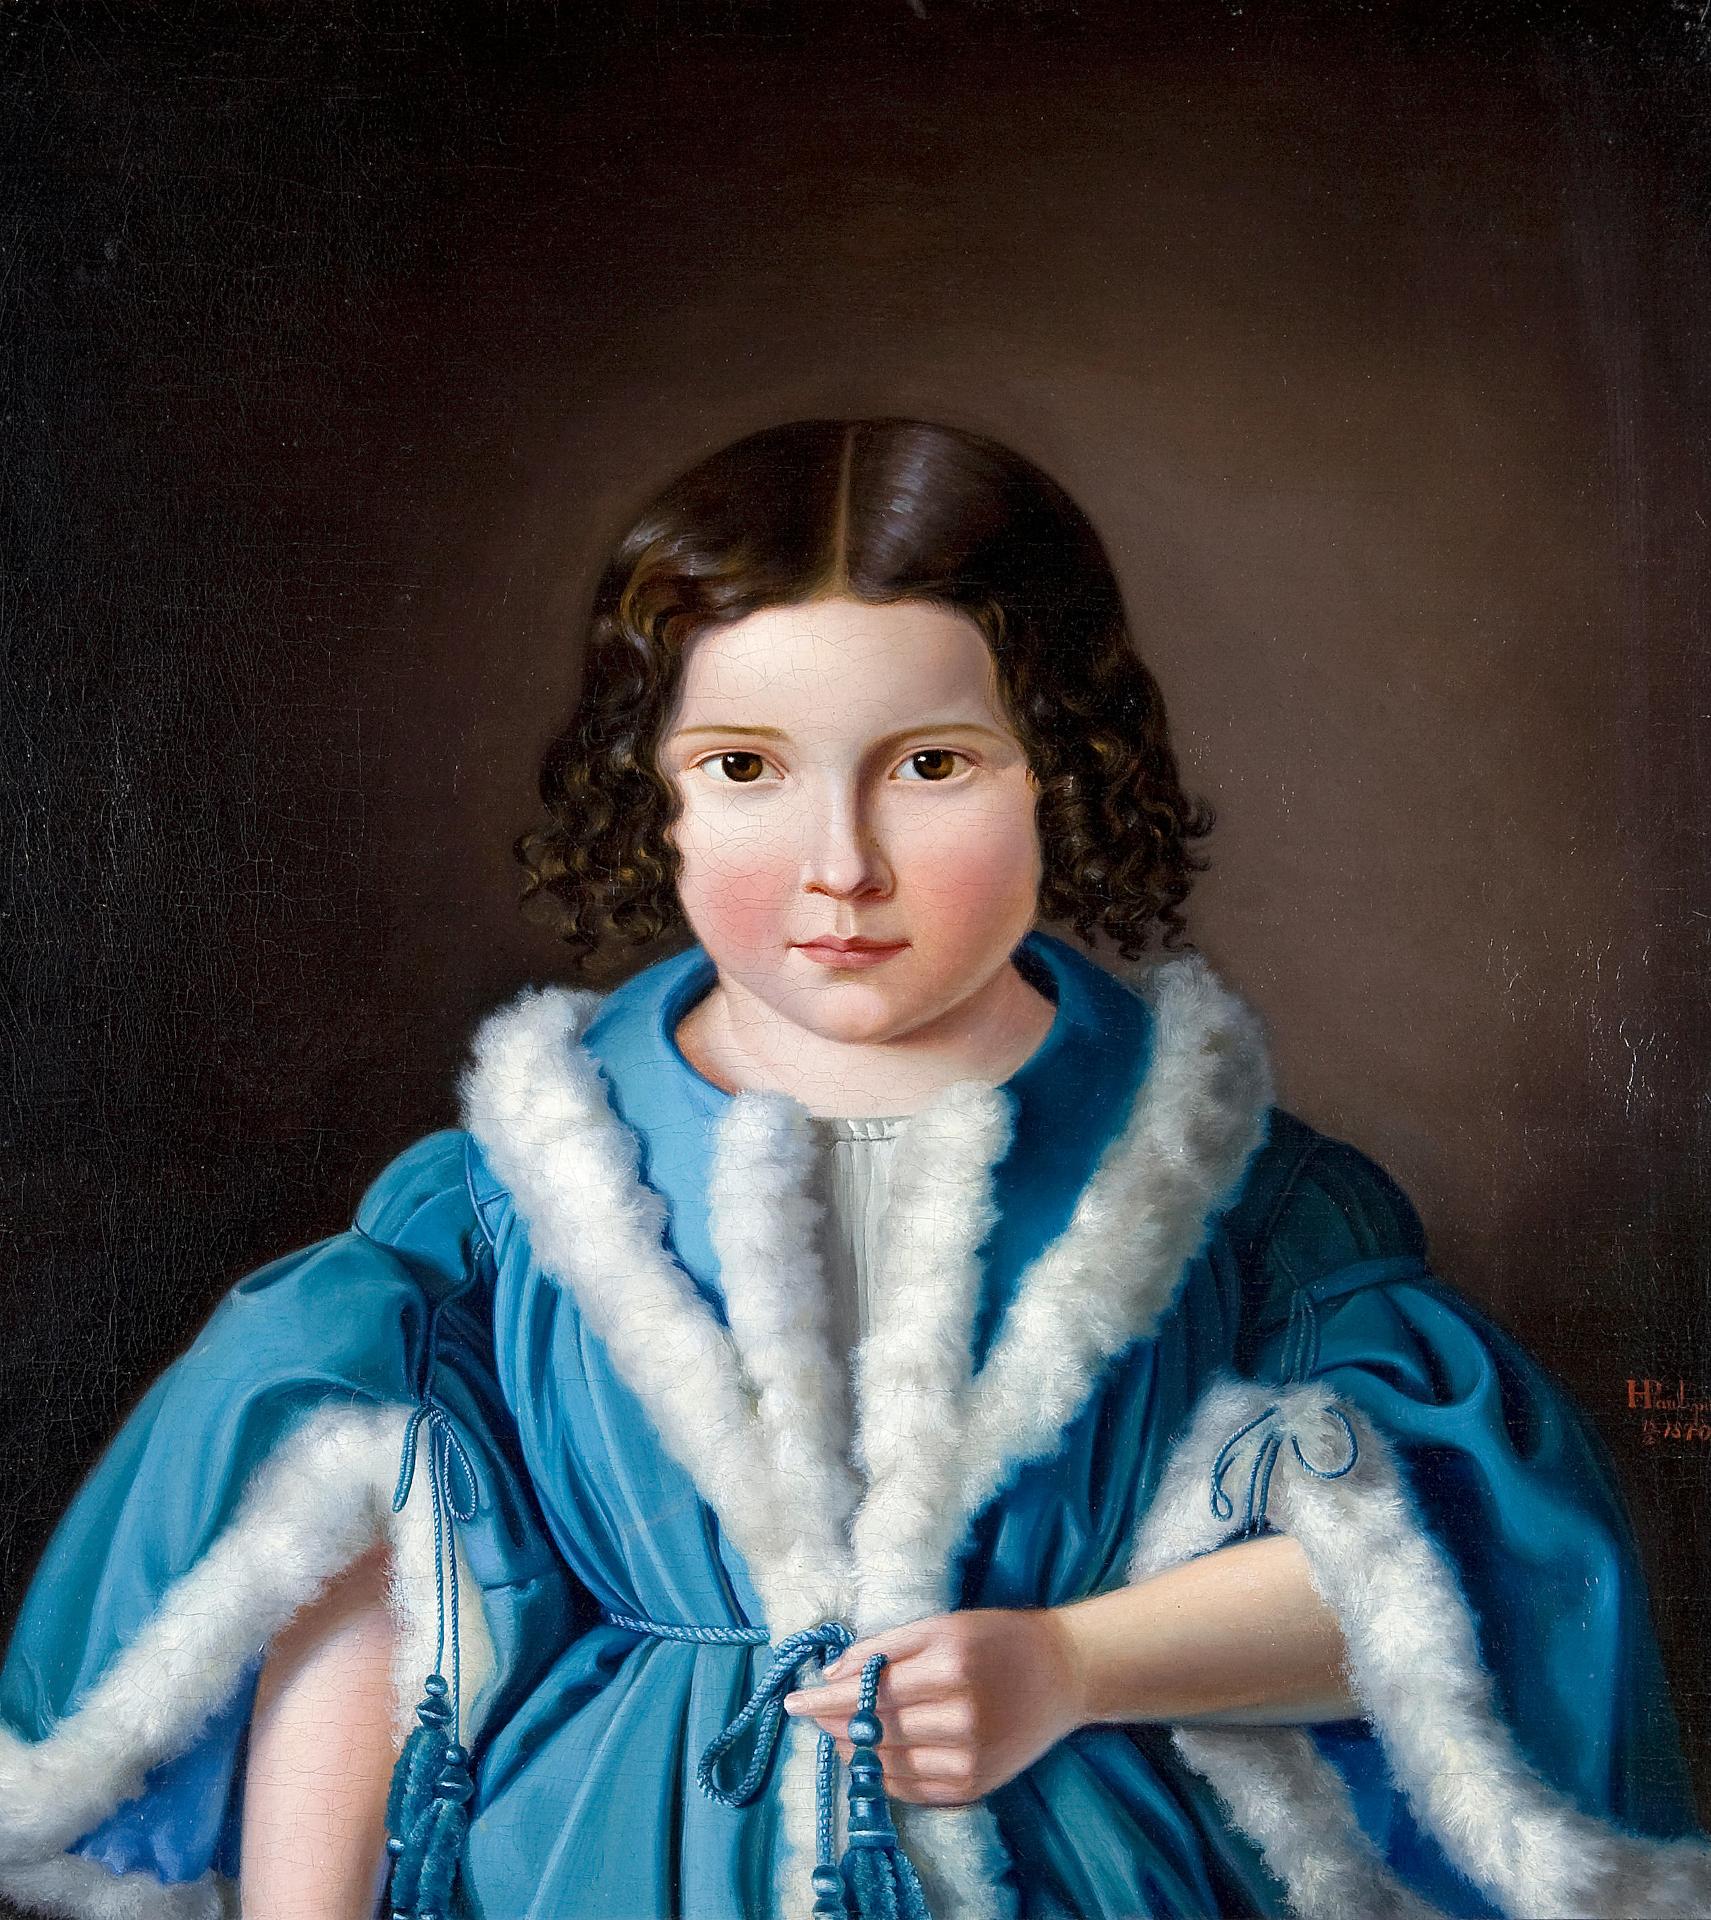 Heinrich Paul - Portrait of a young girl wearing a fur-trimmed blue jacket